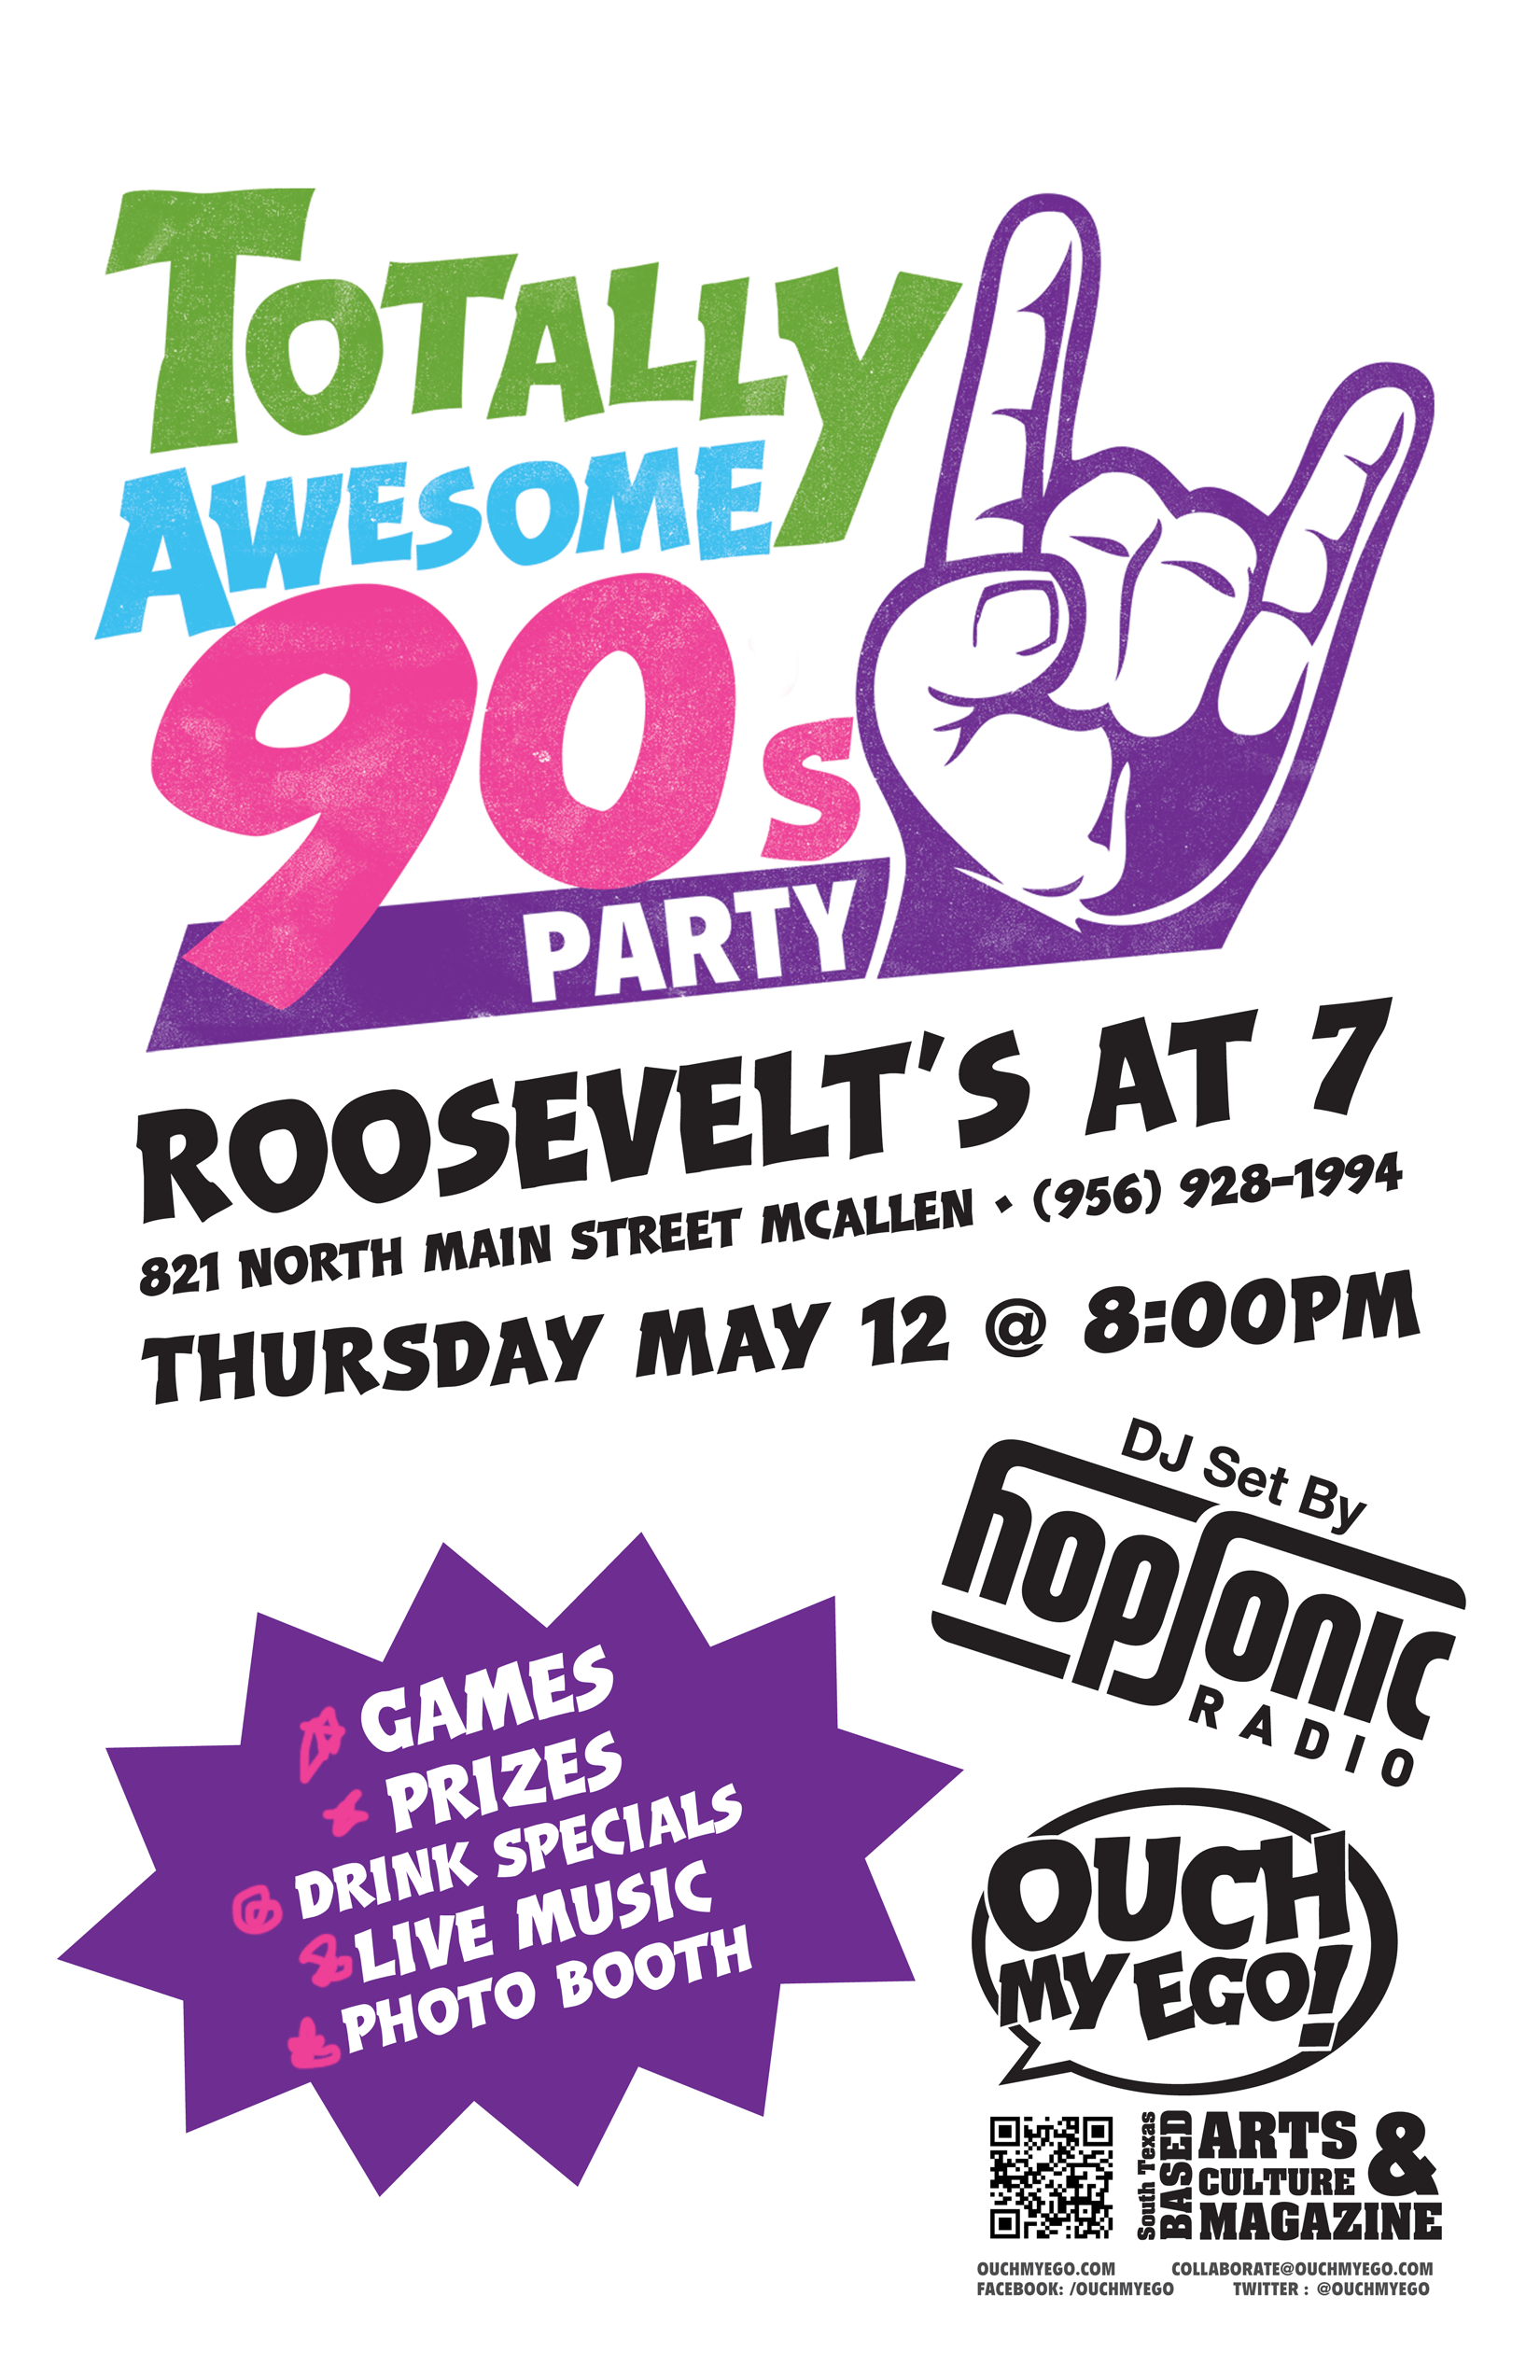 Updated: Totally Awesome 90s Party! 